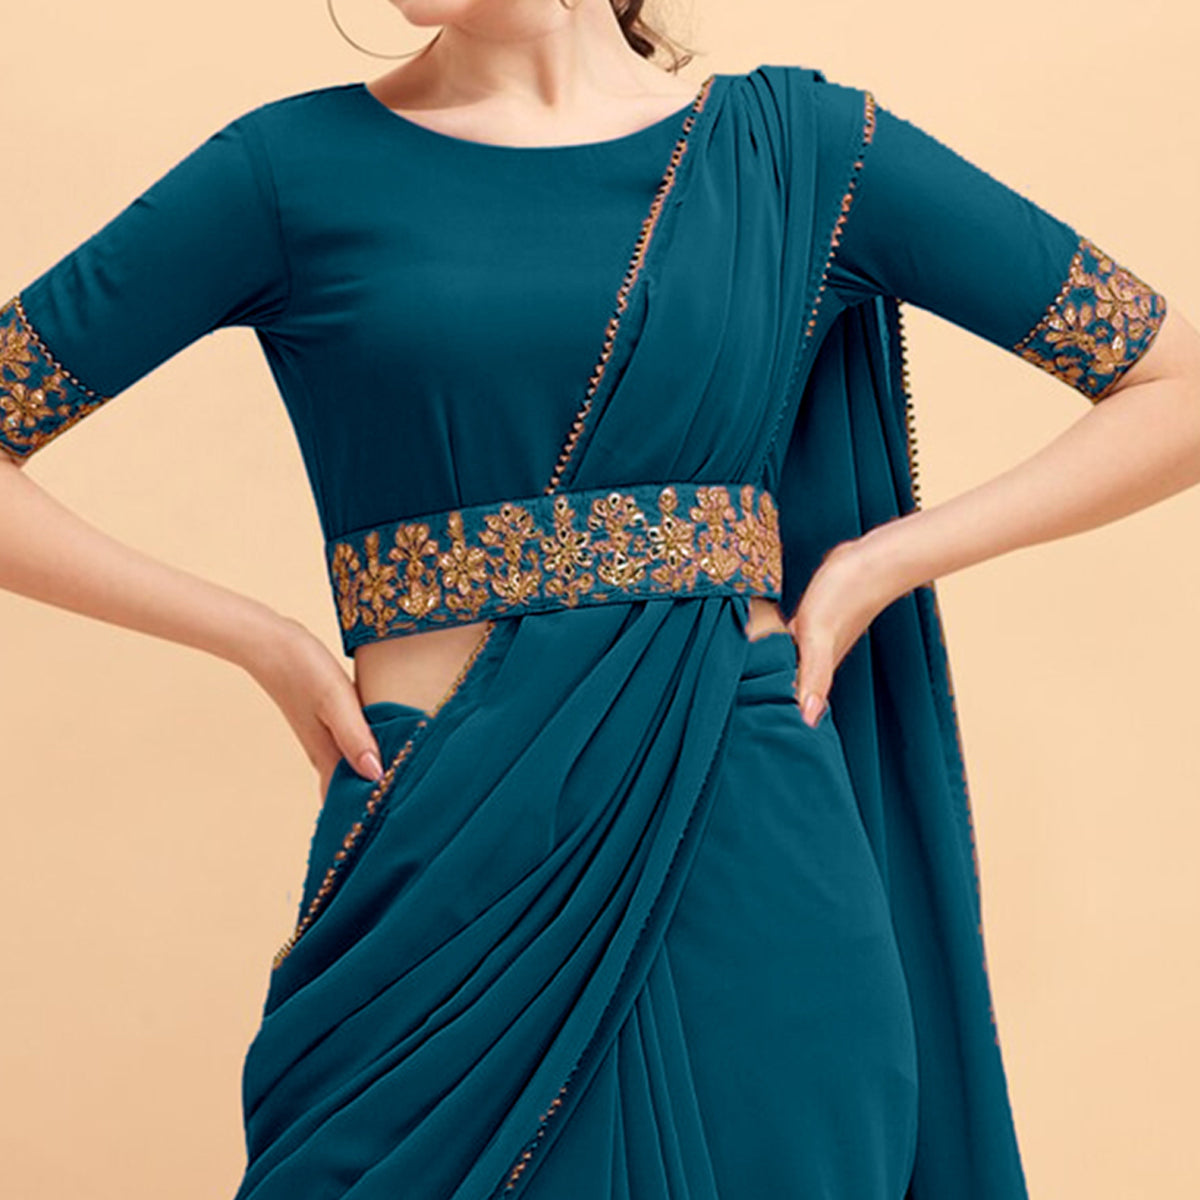 Morpich Solid Georgette Saree With Belt